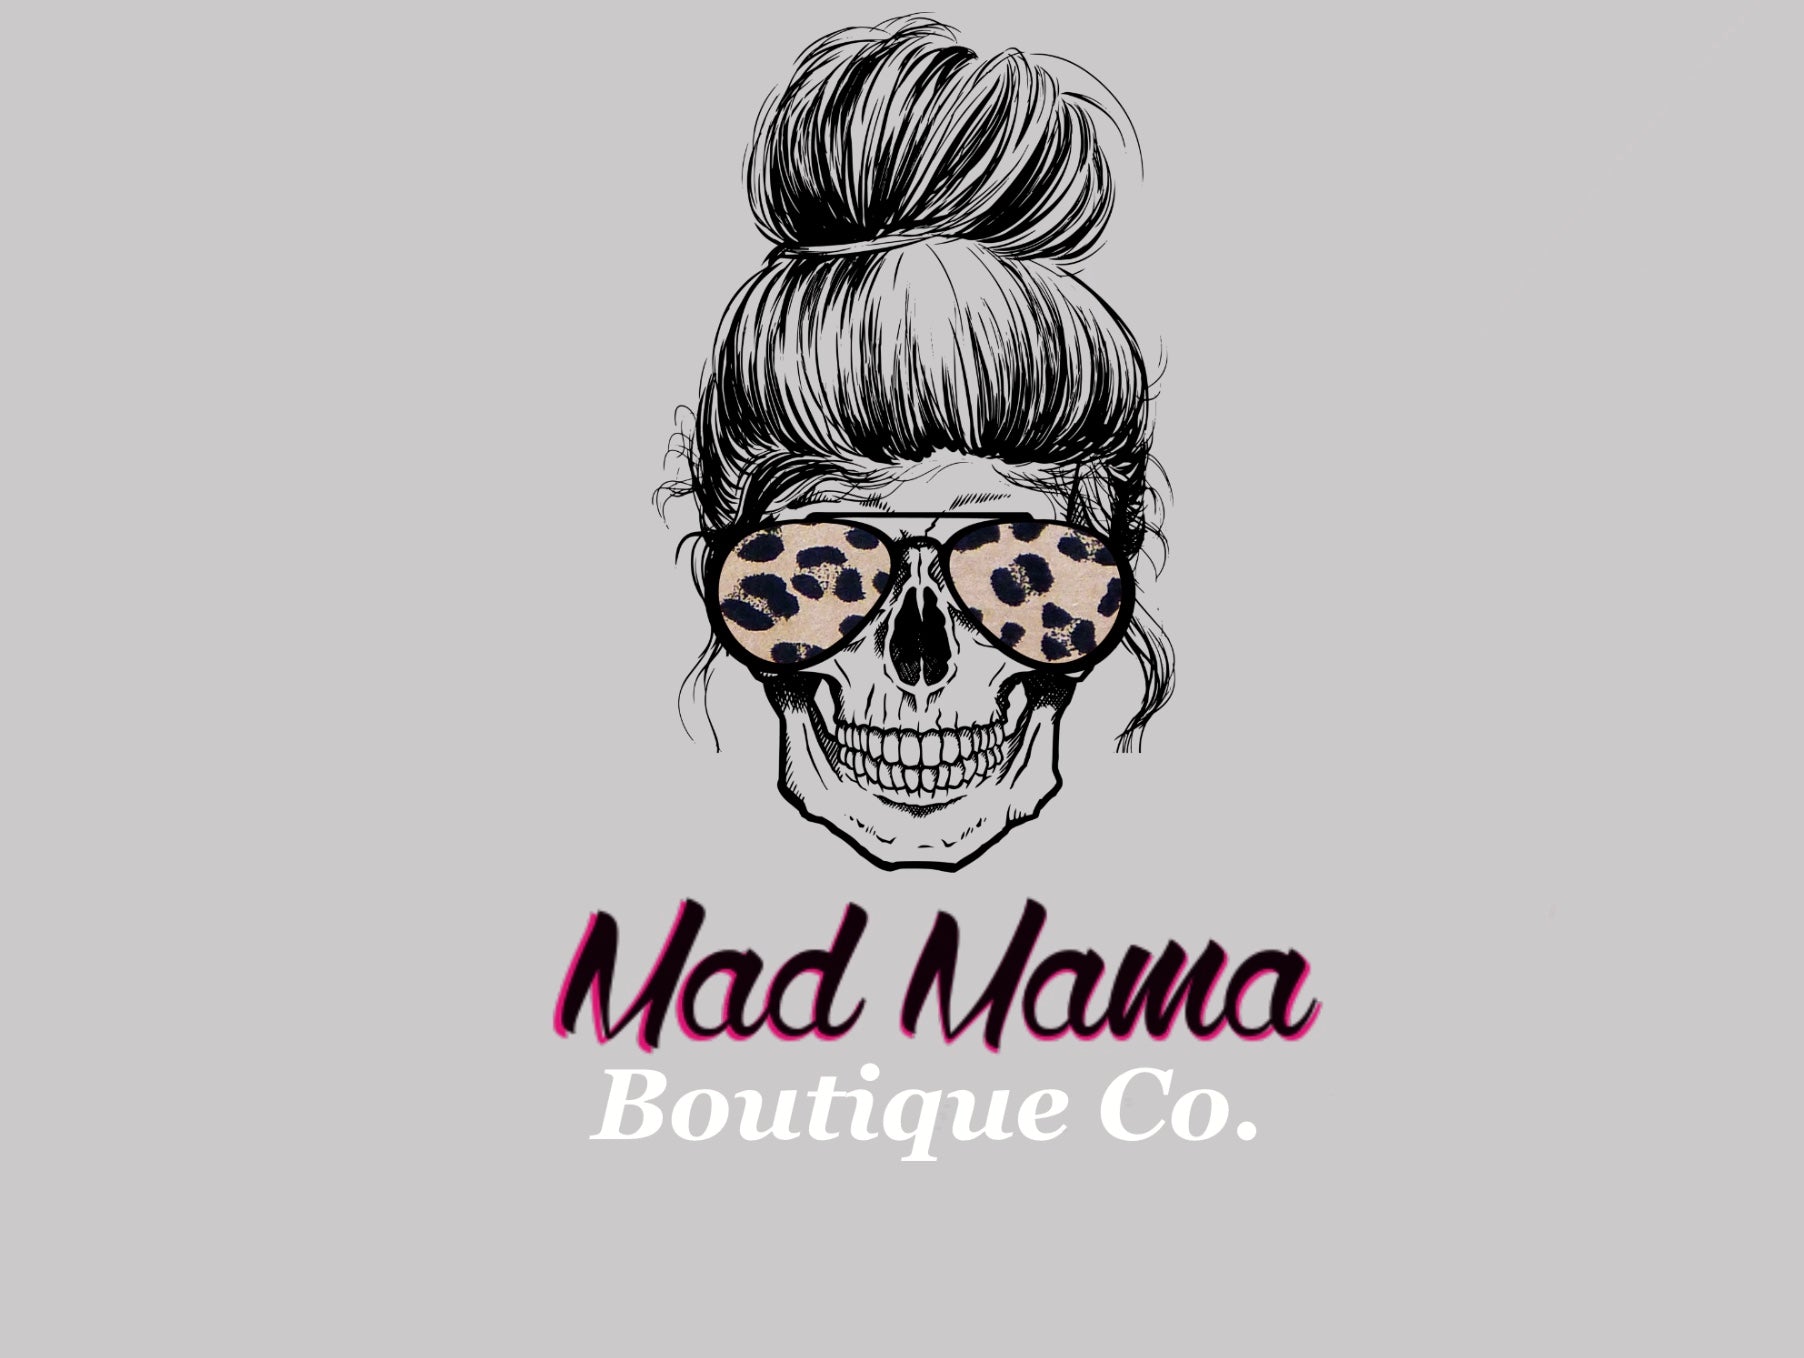 carolyn puhl recommends Www Mad Mamas Com